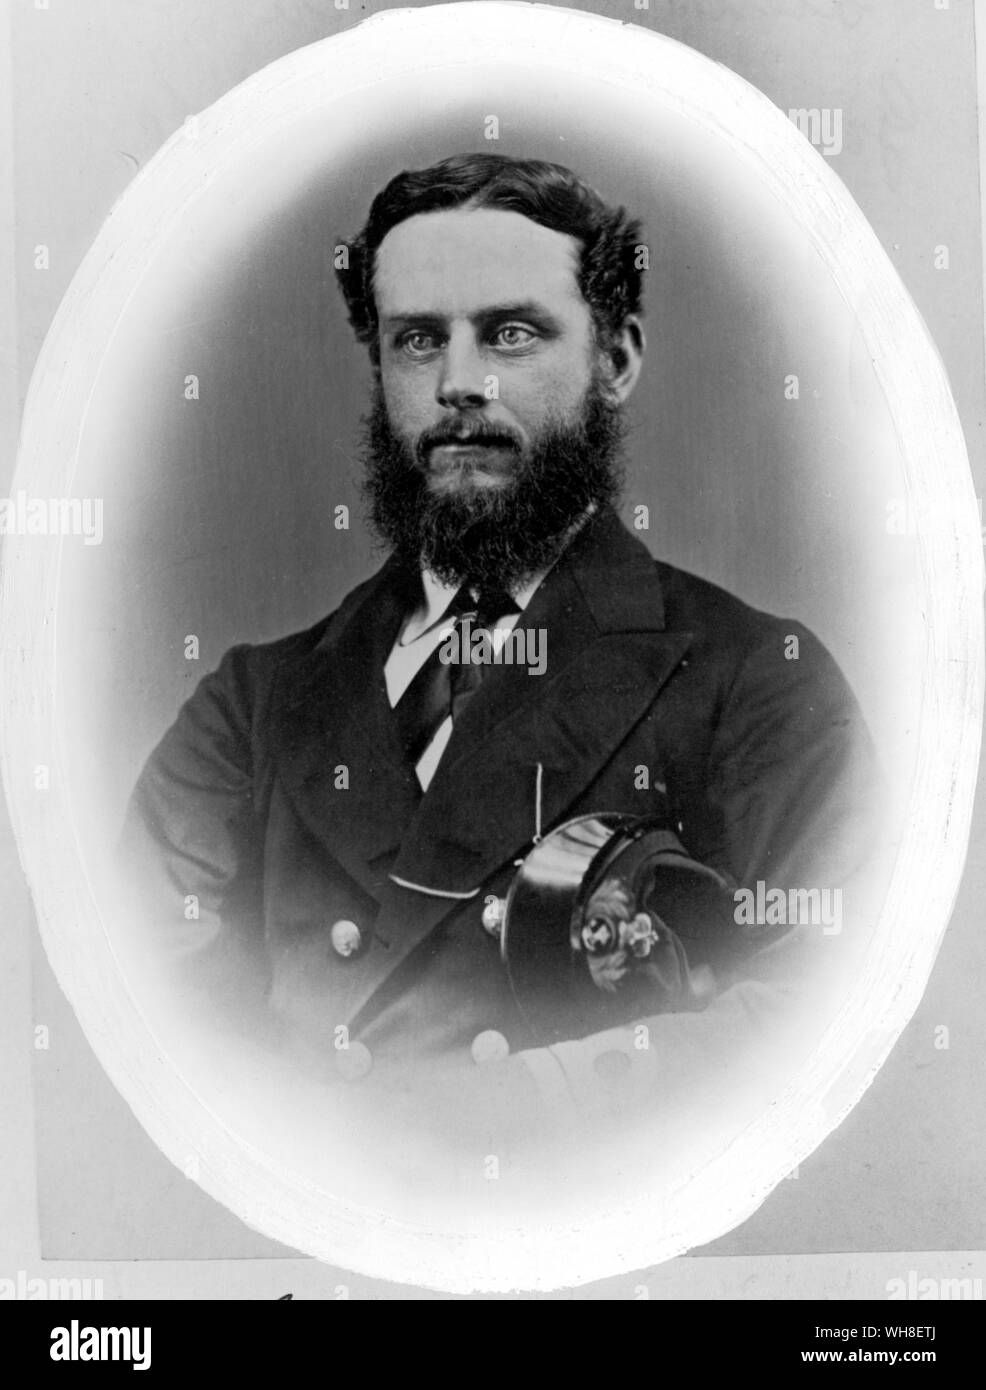 Lieutenant Pelham Aldrich (1844-1930). Joined Royal Navy in 1859 and served on the Challenger Surveying Expedition, (1872-1875). Commanded survey vessels in the China Seas, the Red Sea, the Cape of Good Hope and elsewhere from 1877 to 1891. . . . . . . Stock Photo